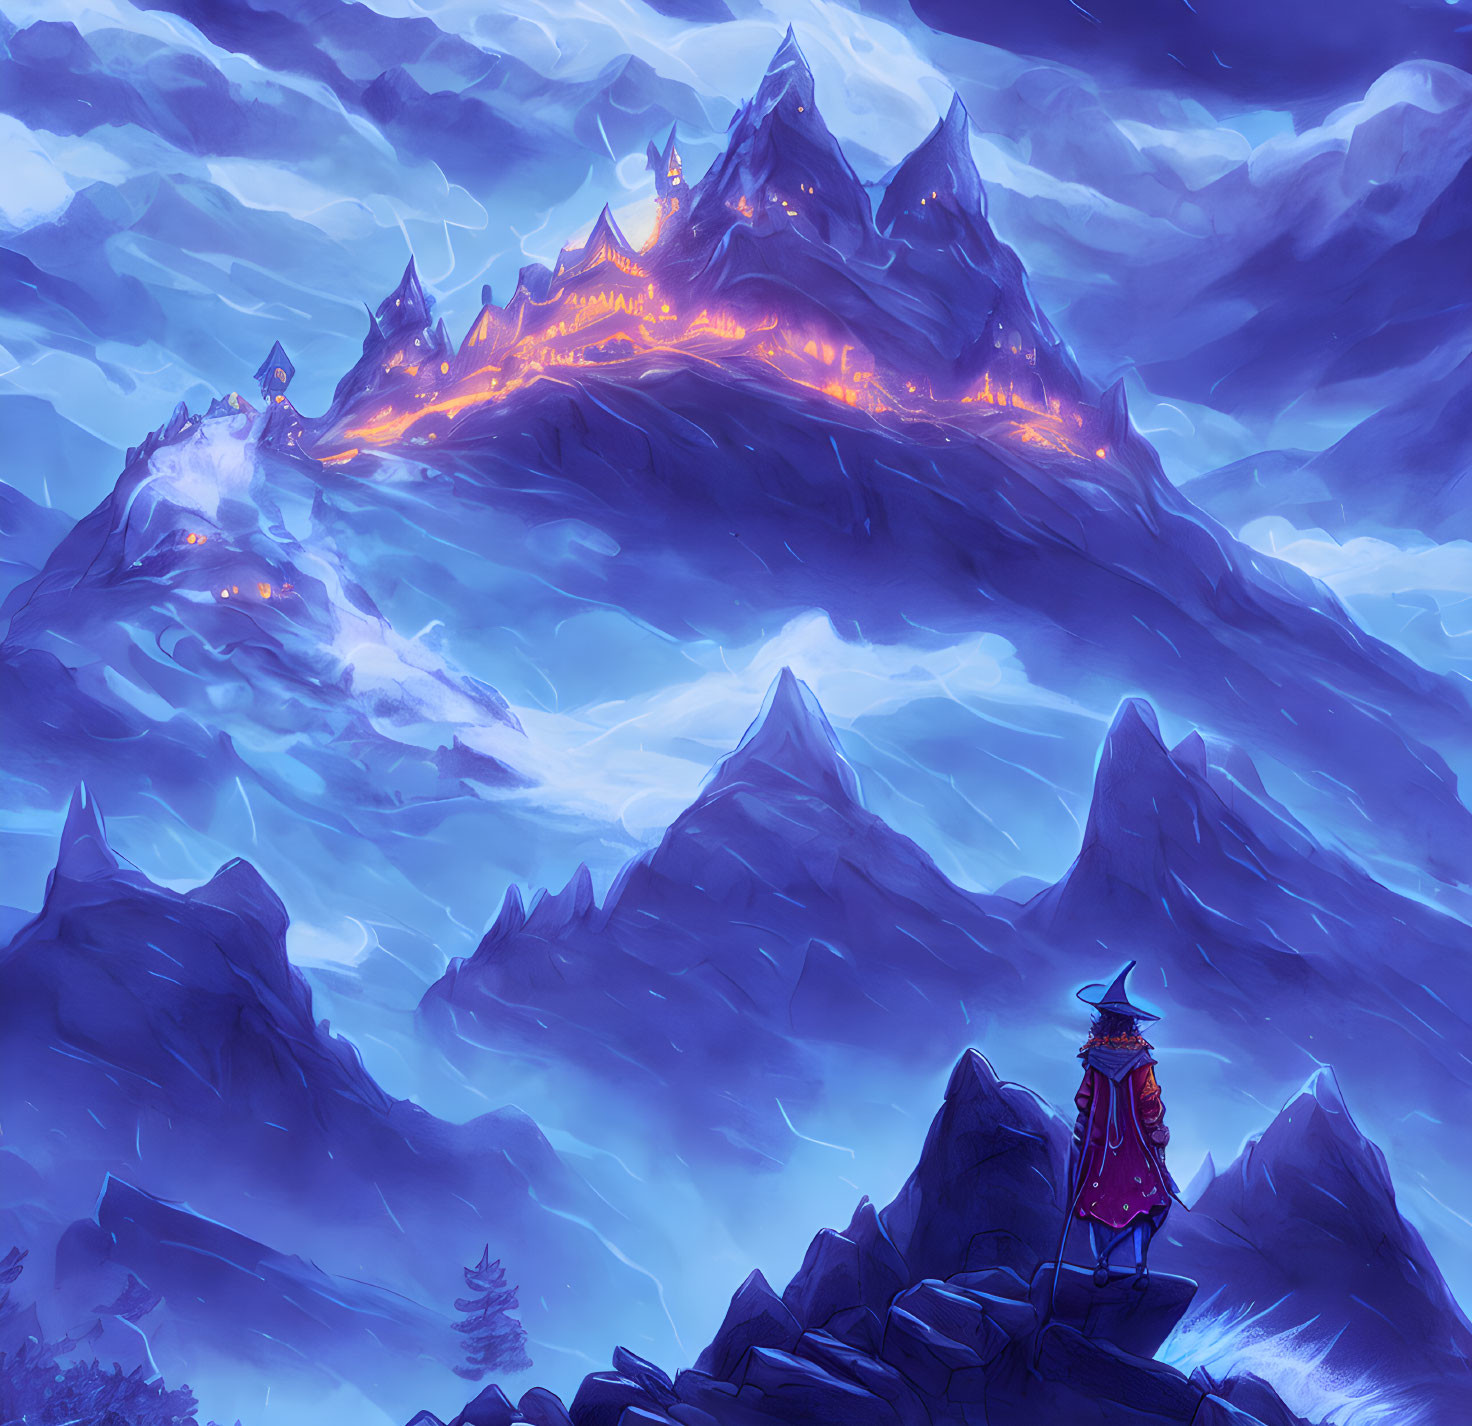 Cloaked Figure on Rocky Outcrop Views Blue and Purple Mountain Range at Night